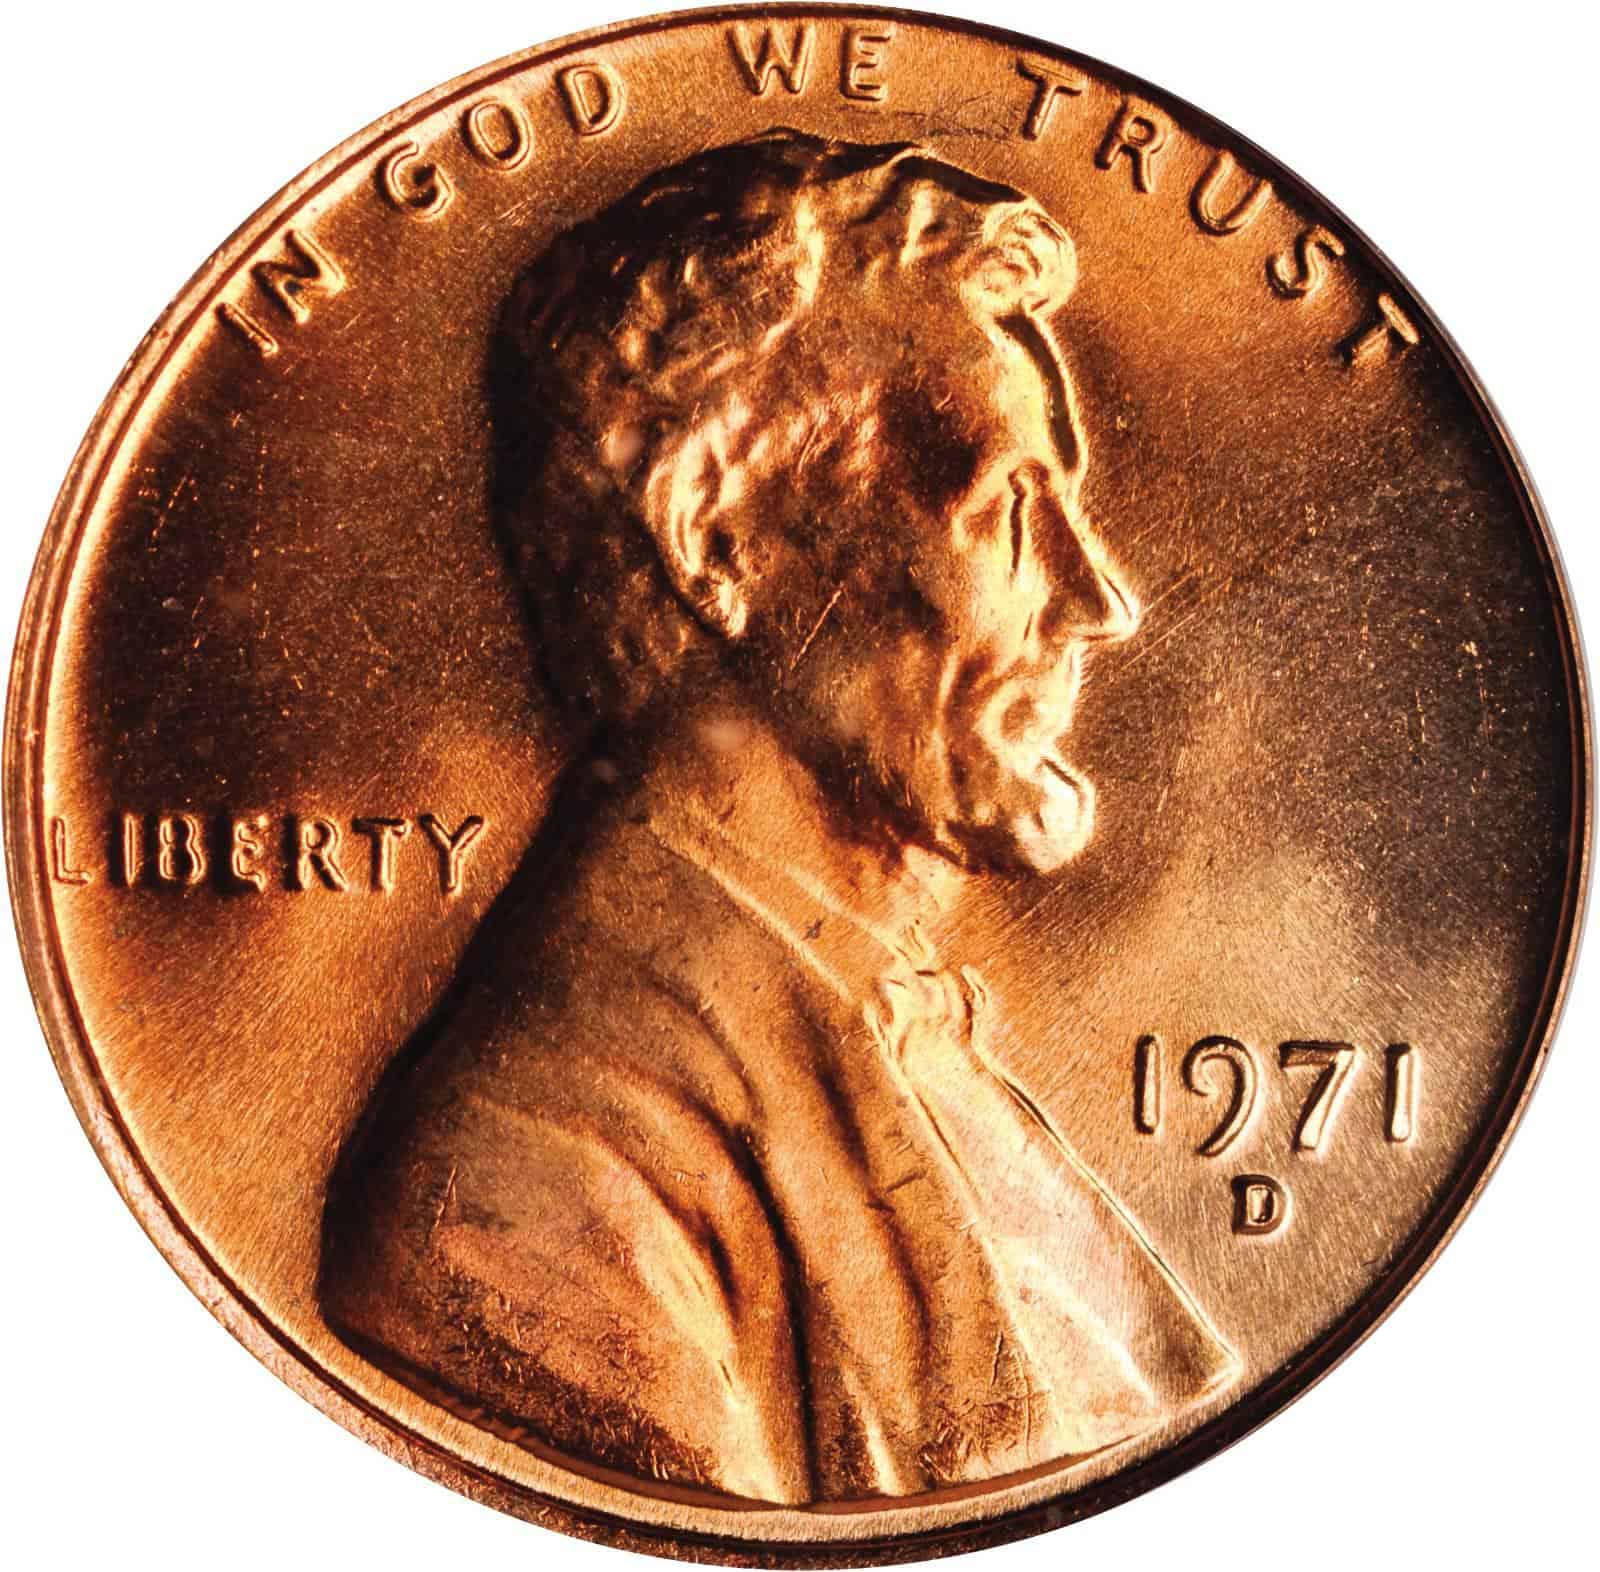 The Obverse of the 1971 Penny